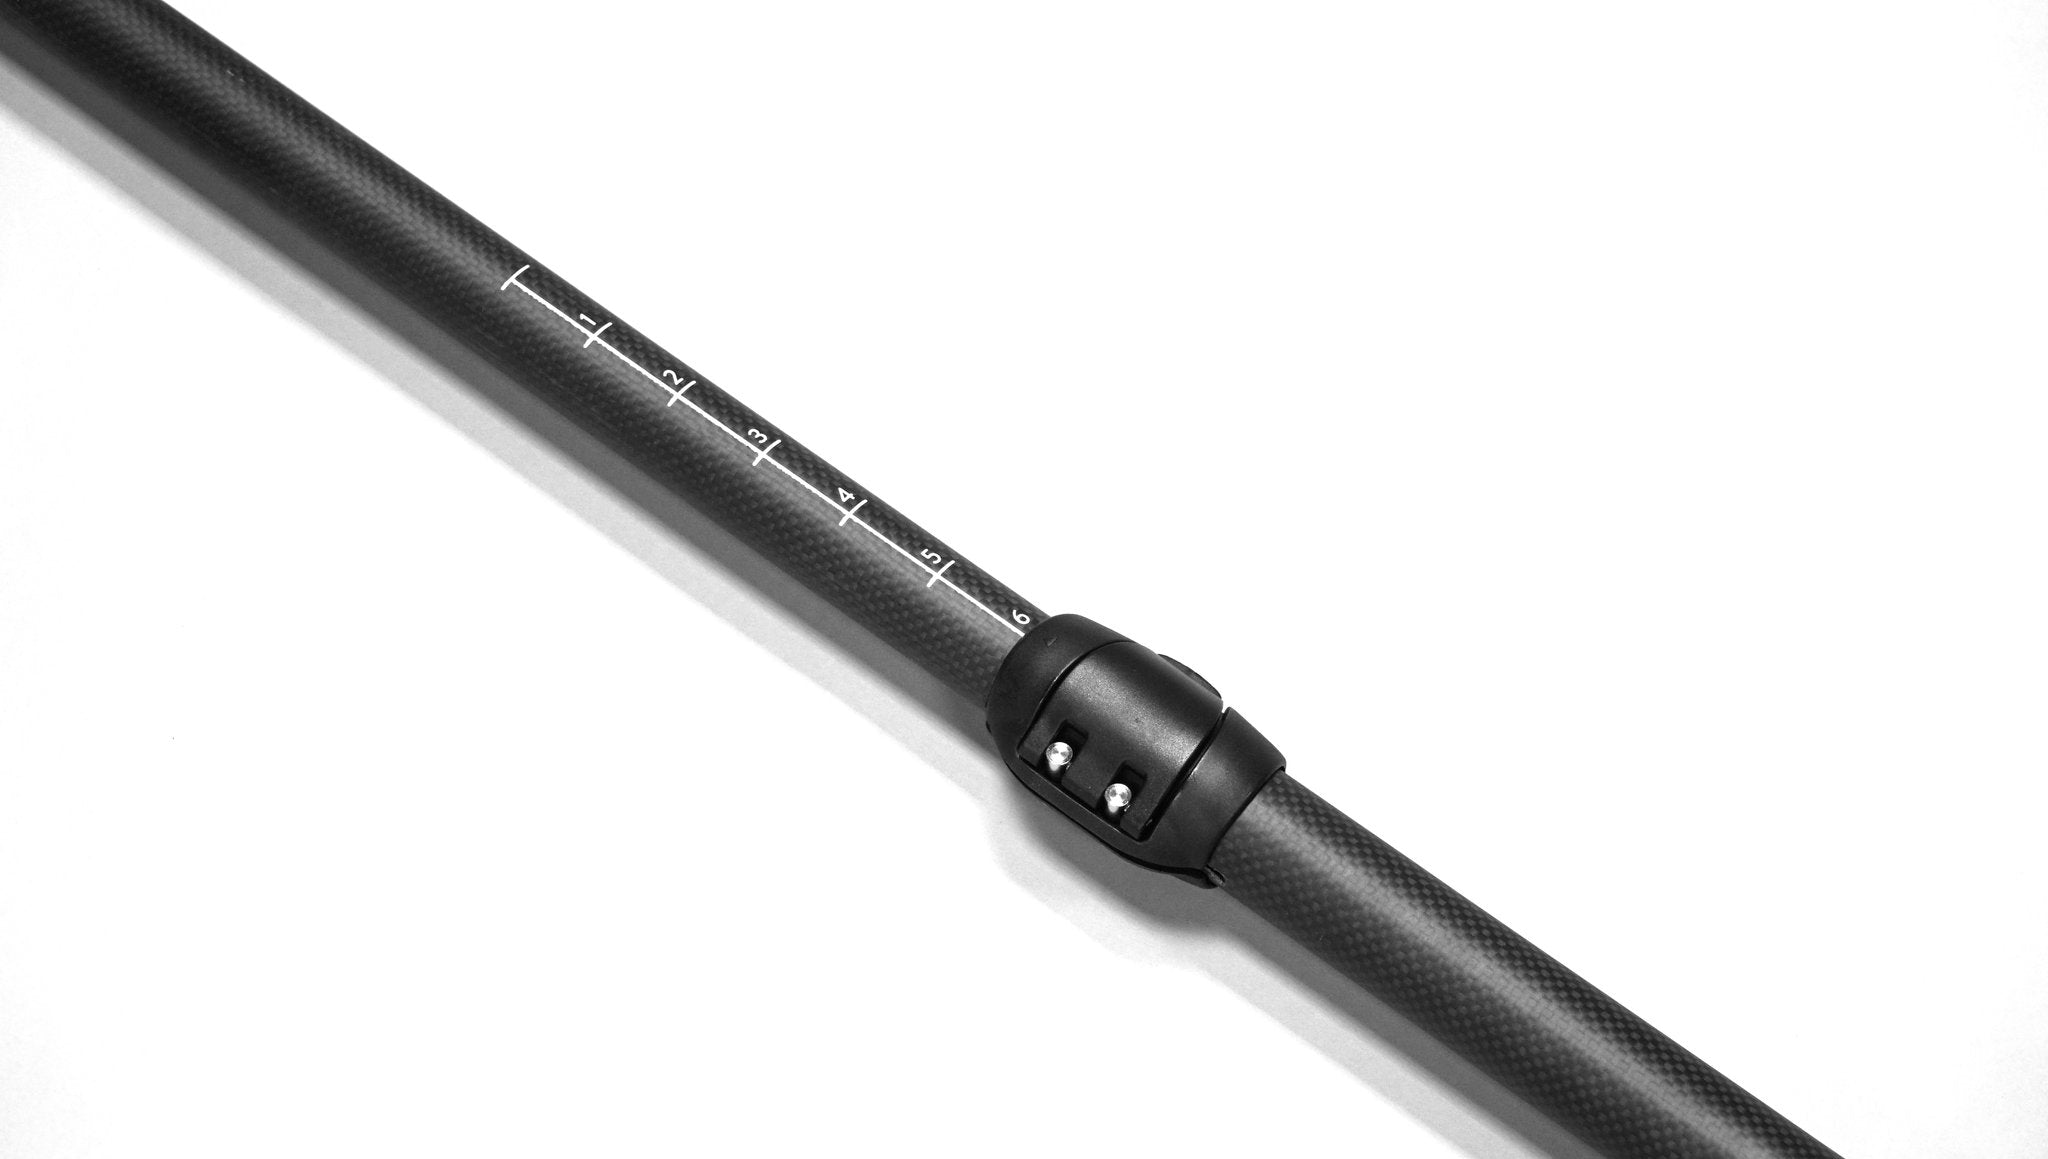 100% Carbon Fiber Composite Shaft reduces weight and adds stiffness 100% Carbon Fiber Blades. Double Paddle Adjusts between 112